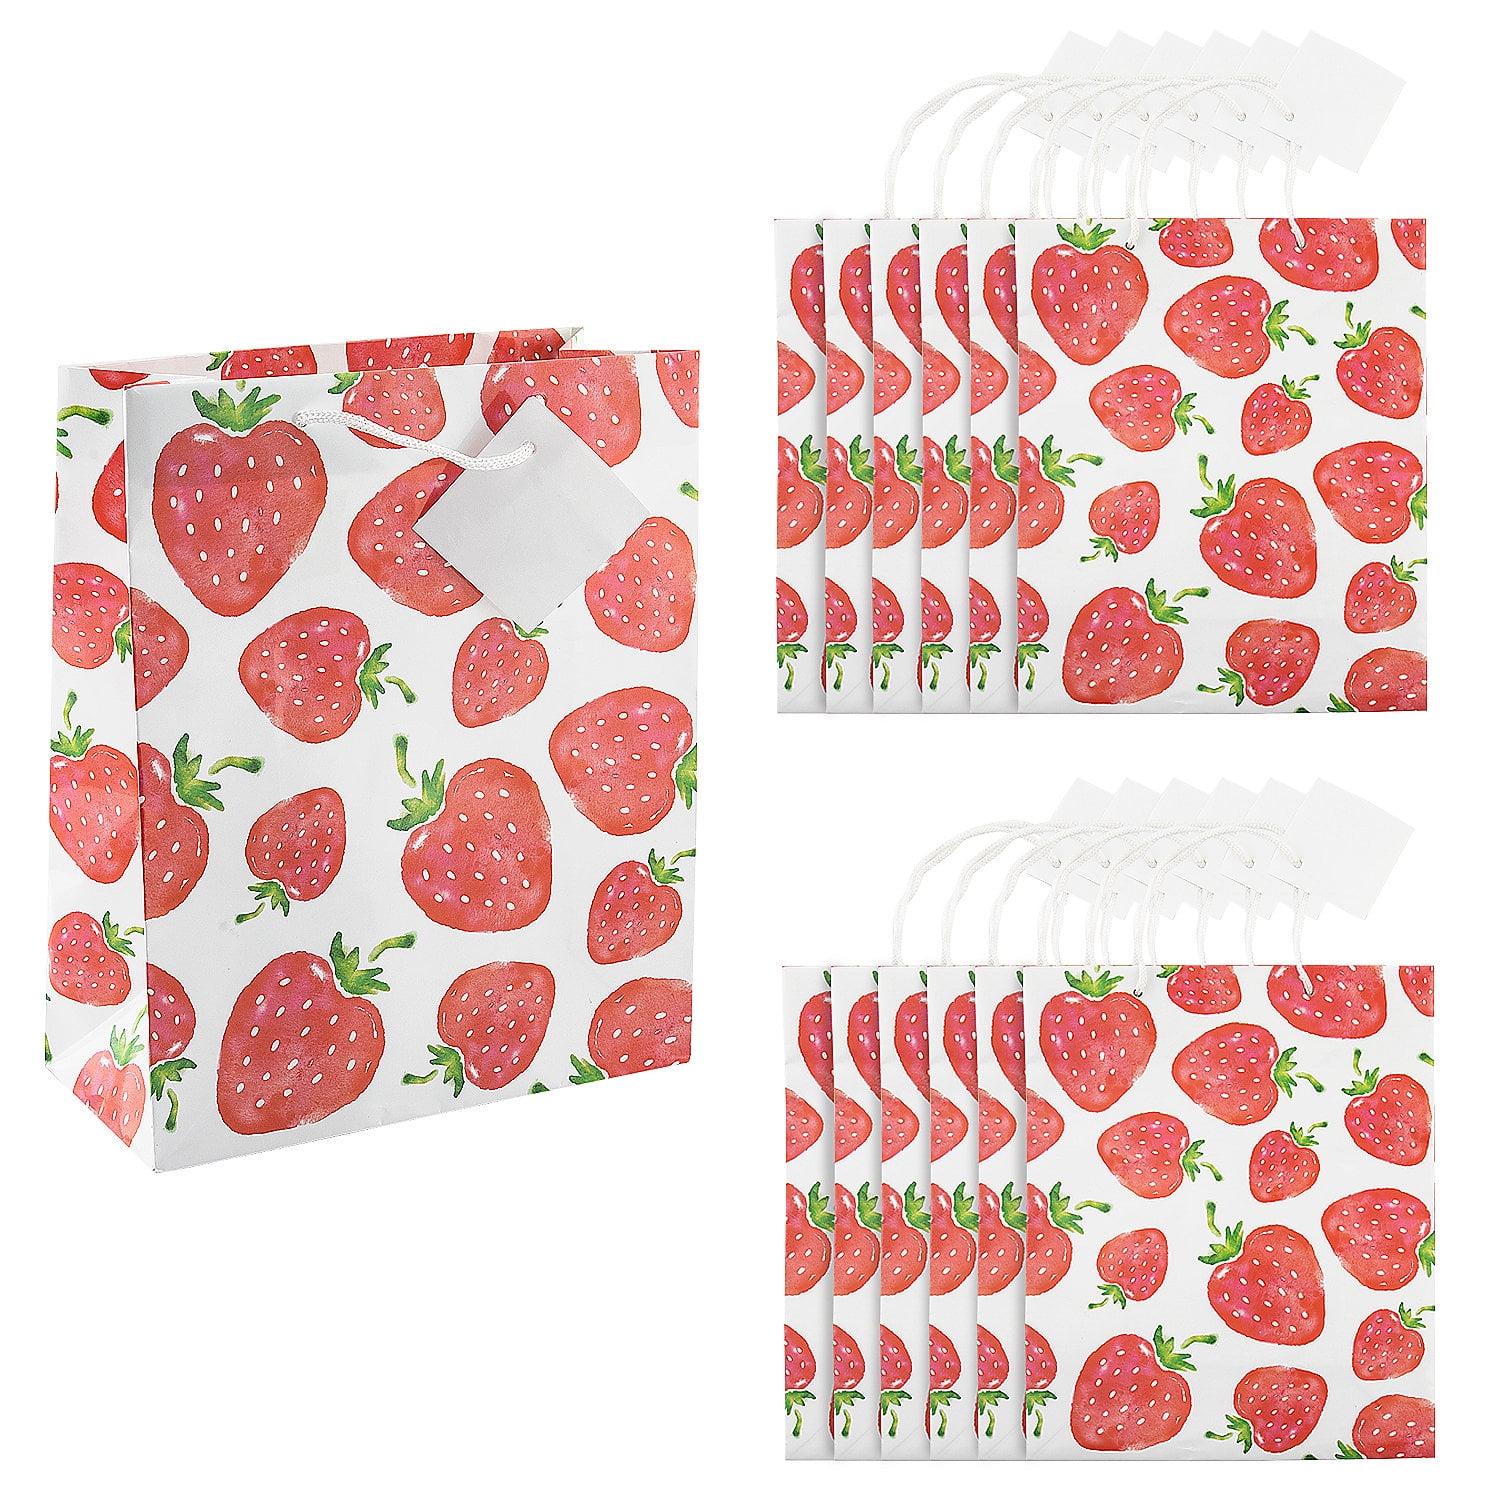 7 1/4 x 9 Medium Strawberry Gift Bags with Tags - 12 Pieces 